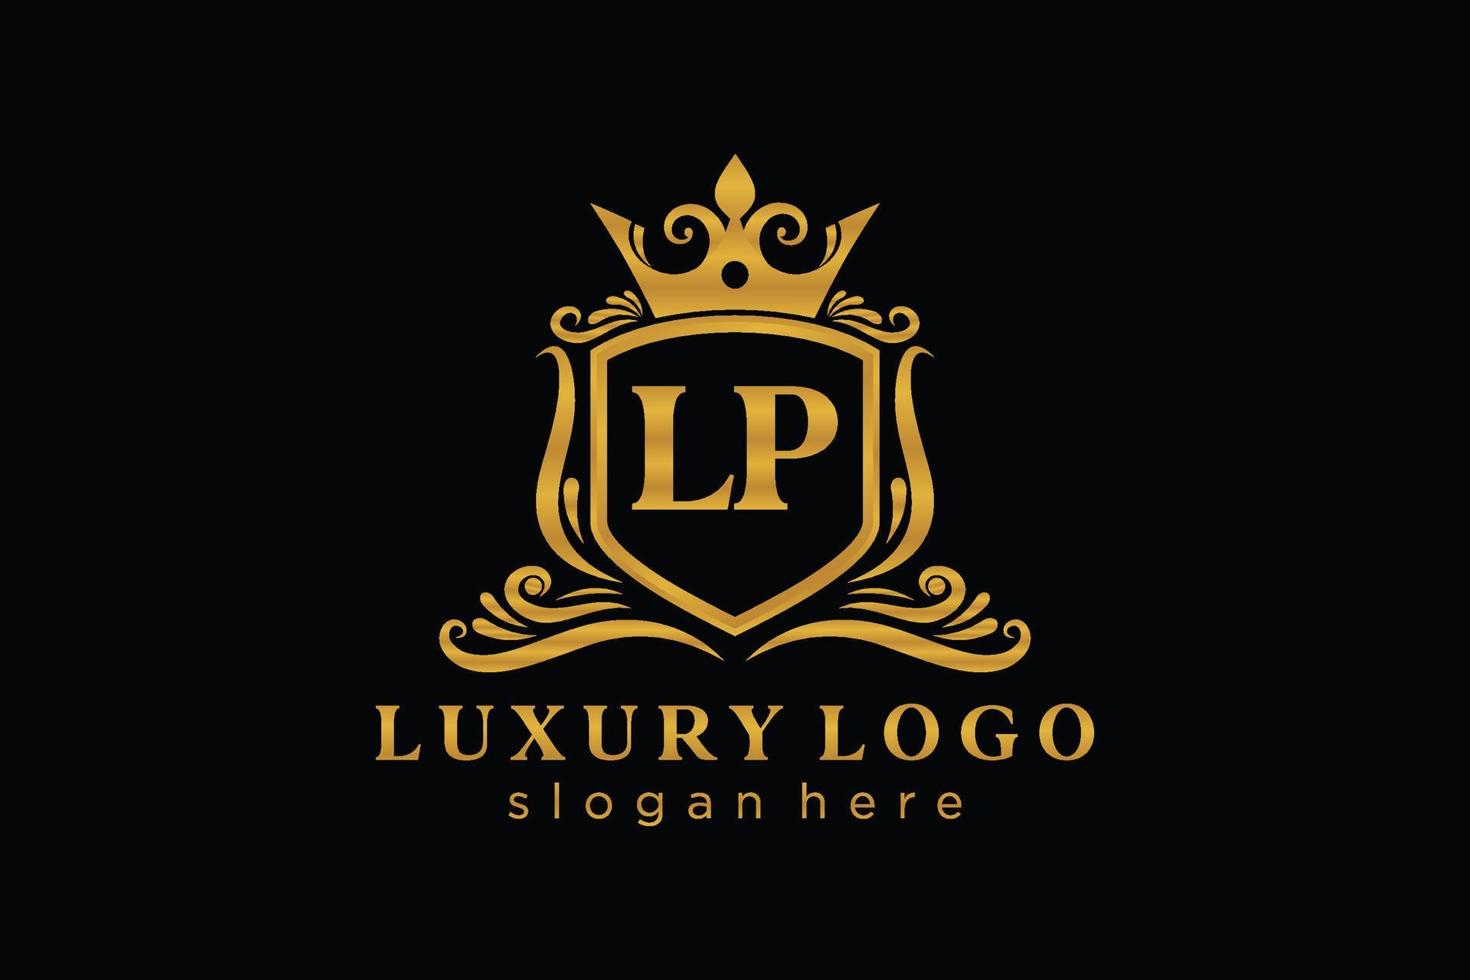 Initial LP Letter Royal Luxury Logo template in vector art for Restaurant, Royalty, Boutique, Cafe, Hotel, Heraldic, Jewelry, Fashion and other vector illustration.